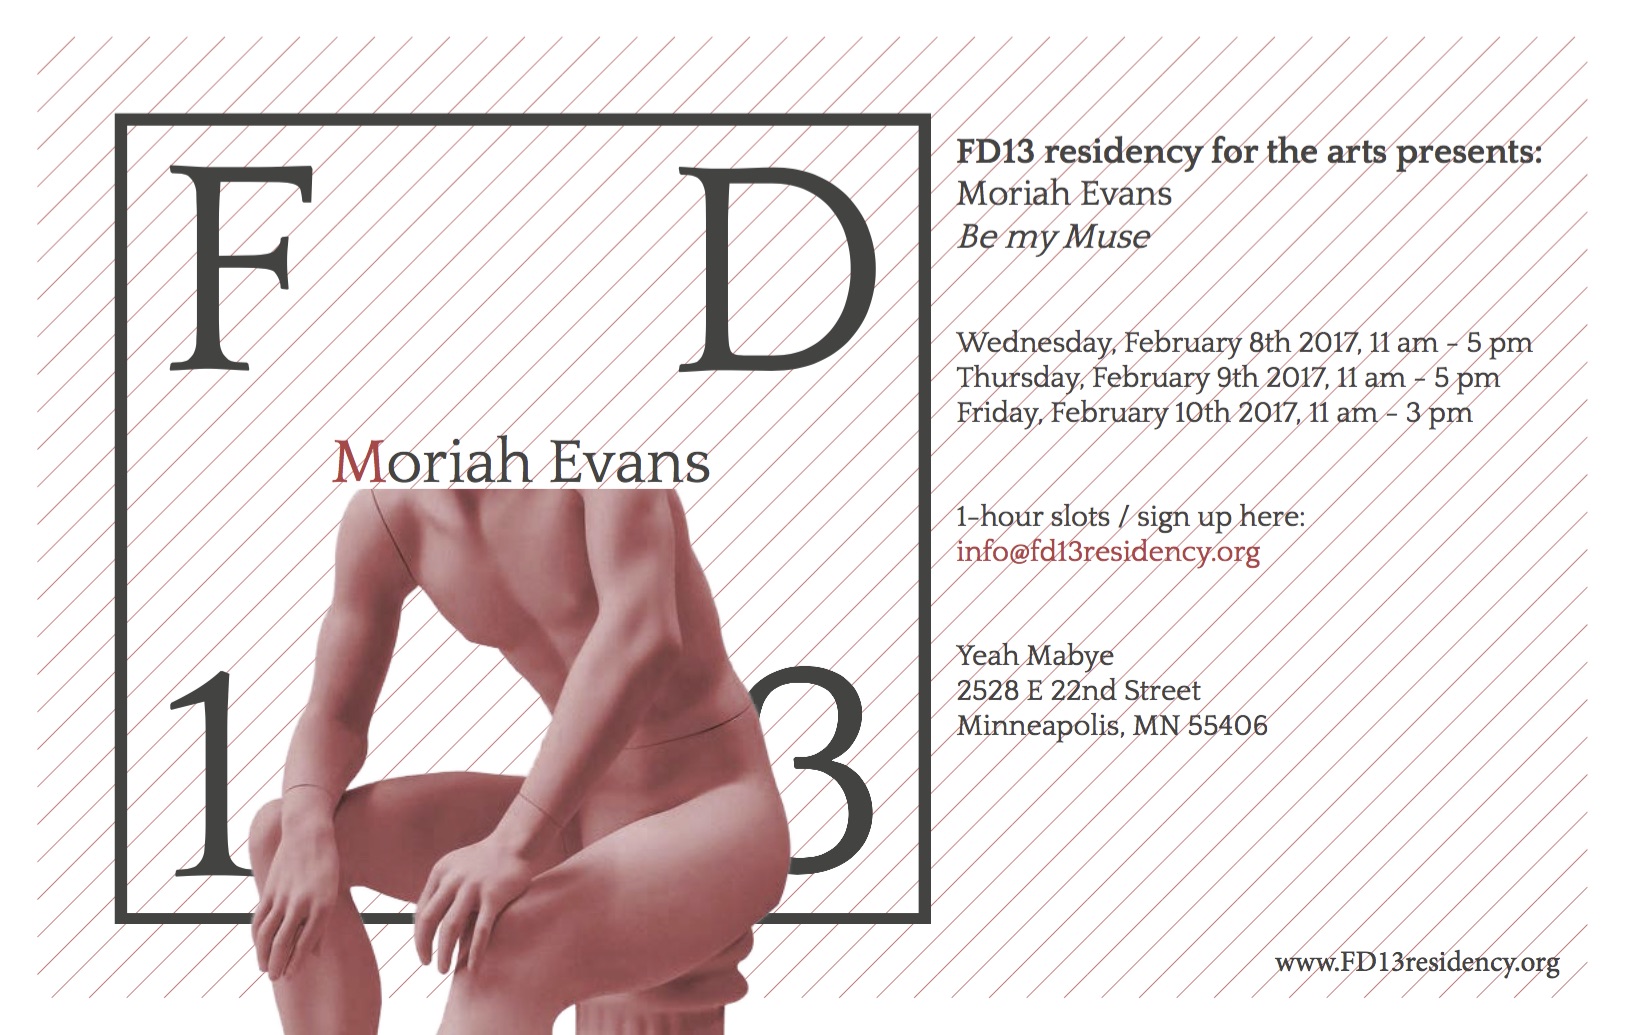 FD13 presents: Moriah Evans. Be My Muse. 8–10 February 2017, 11am–5pm. Yeah Maybe.